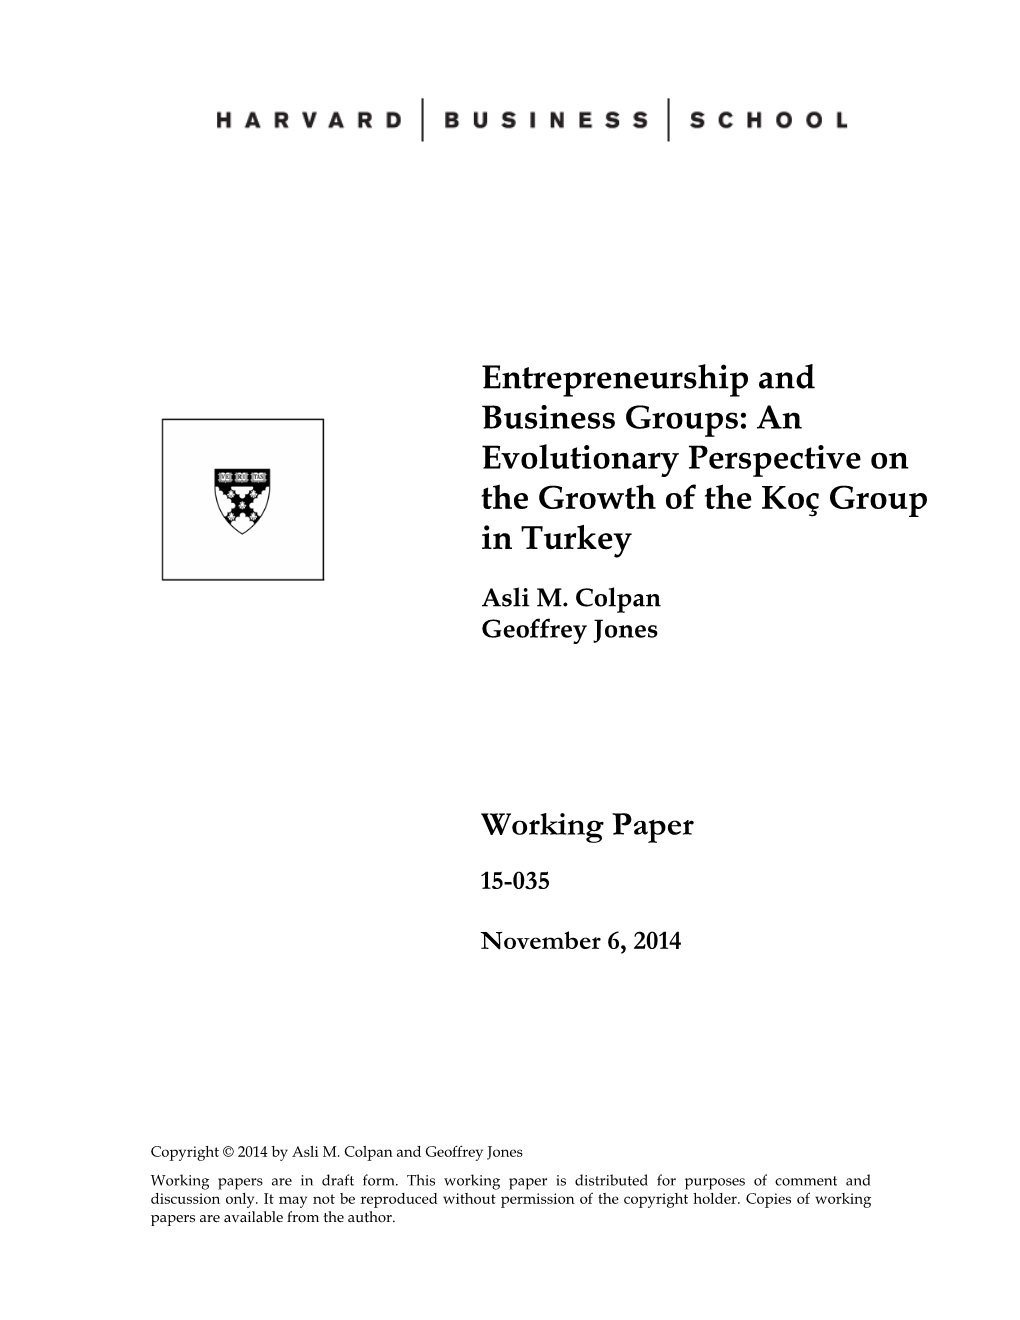 Entrepreneurship and Business Groups: an Evolutionary Perspective on the Growth of the Koç Group in Turkey